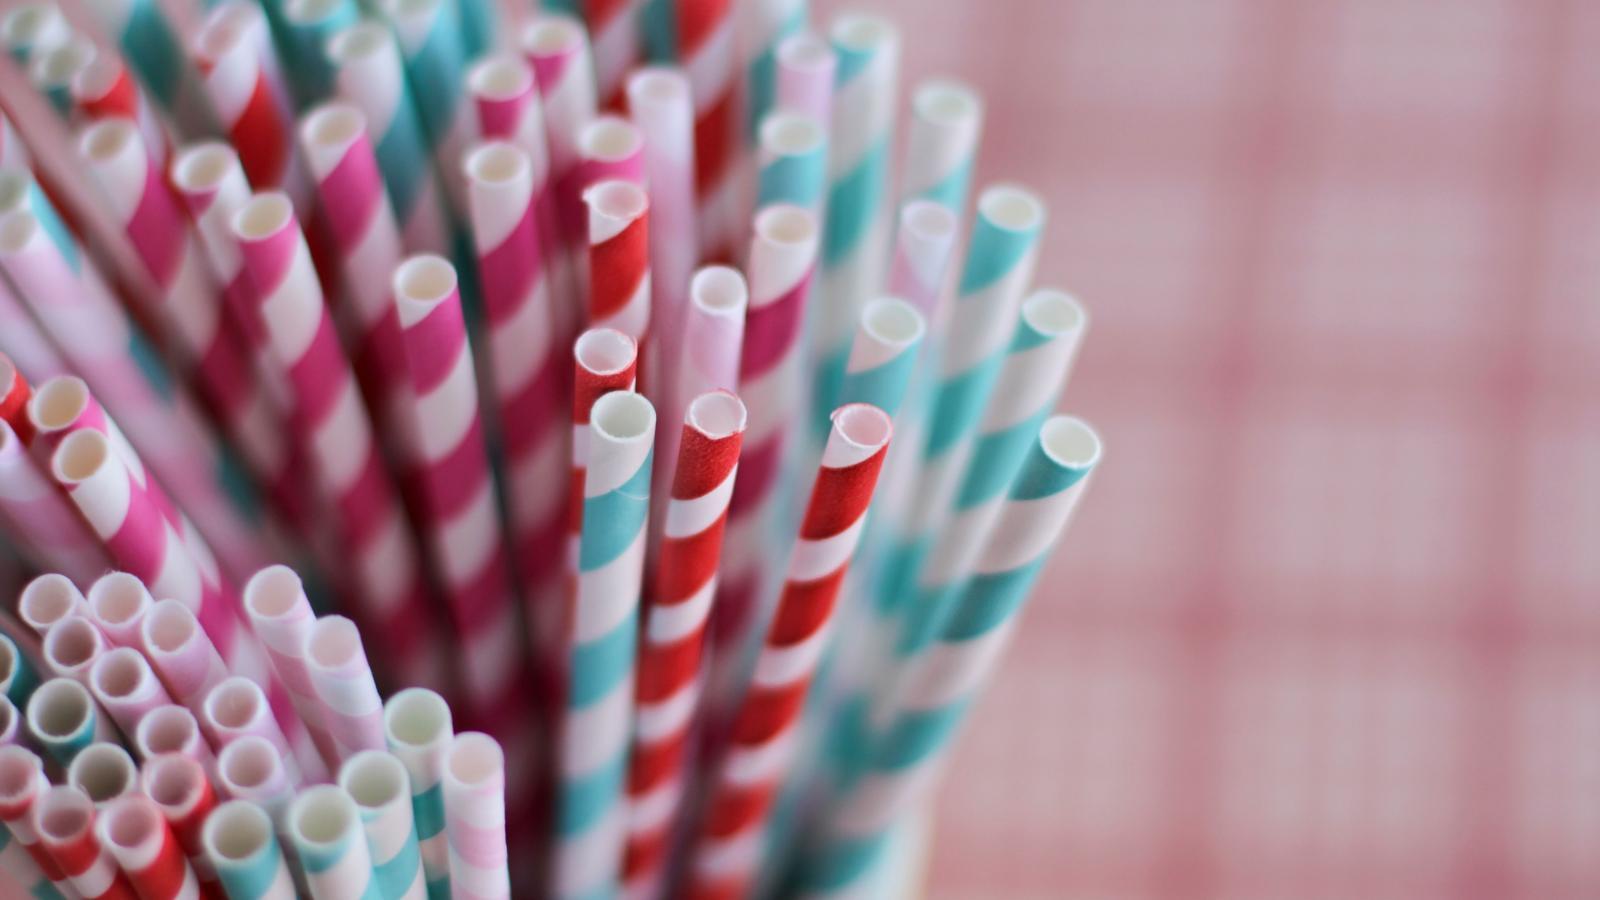 Ban plastic straws. Just don't use paper ones